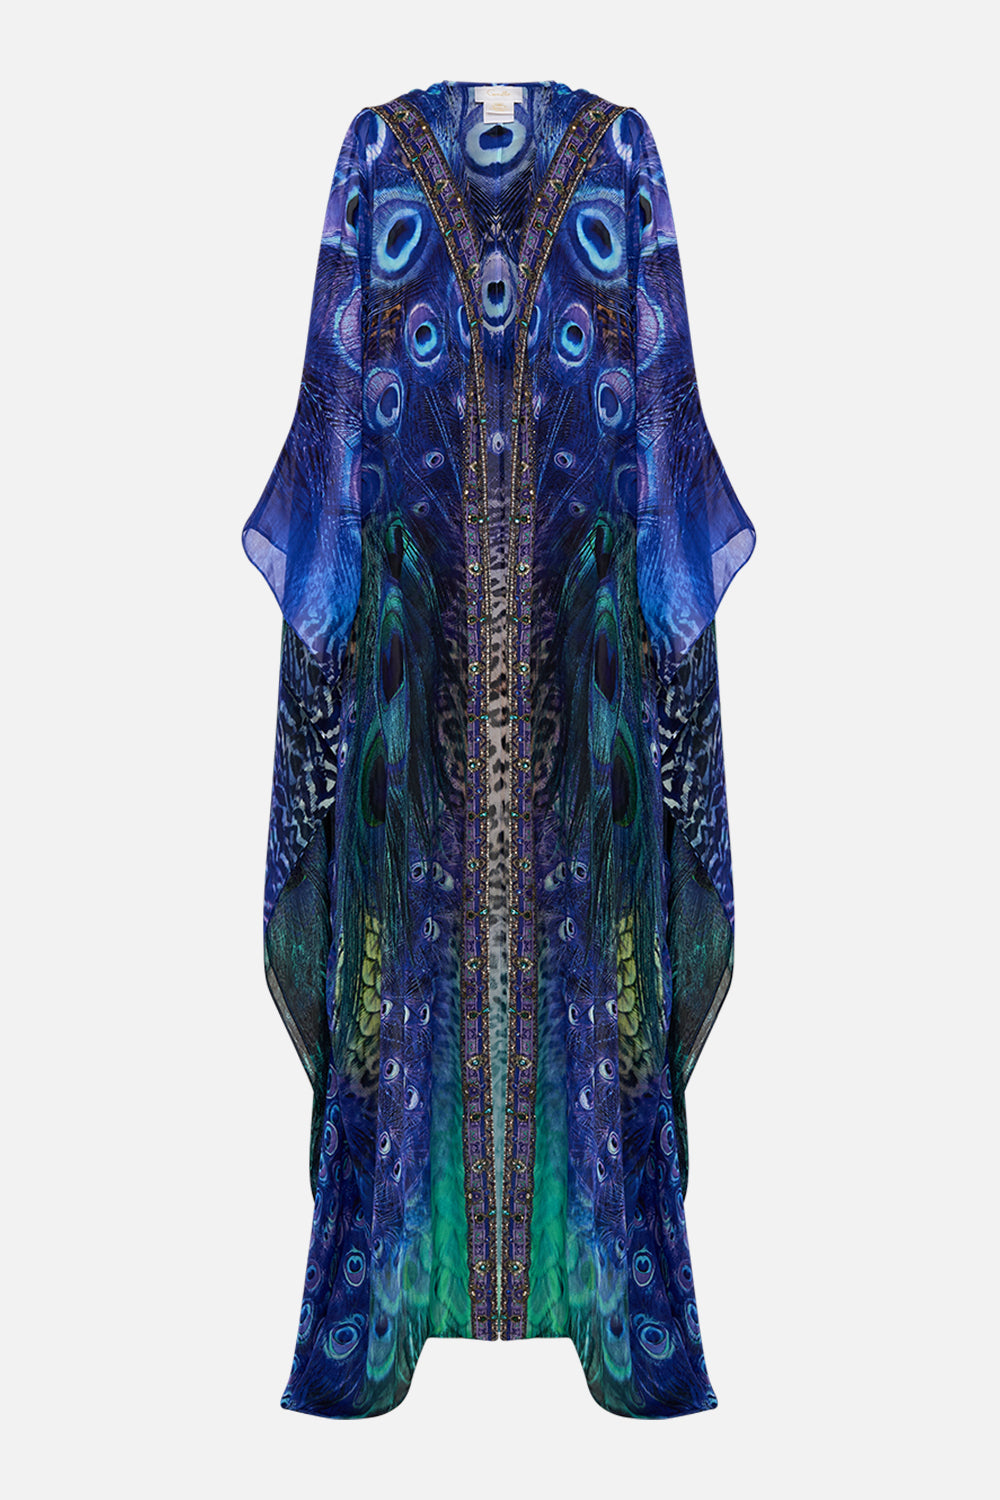 Product view of CAMILLA silk robe in Peacock Rock print